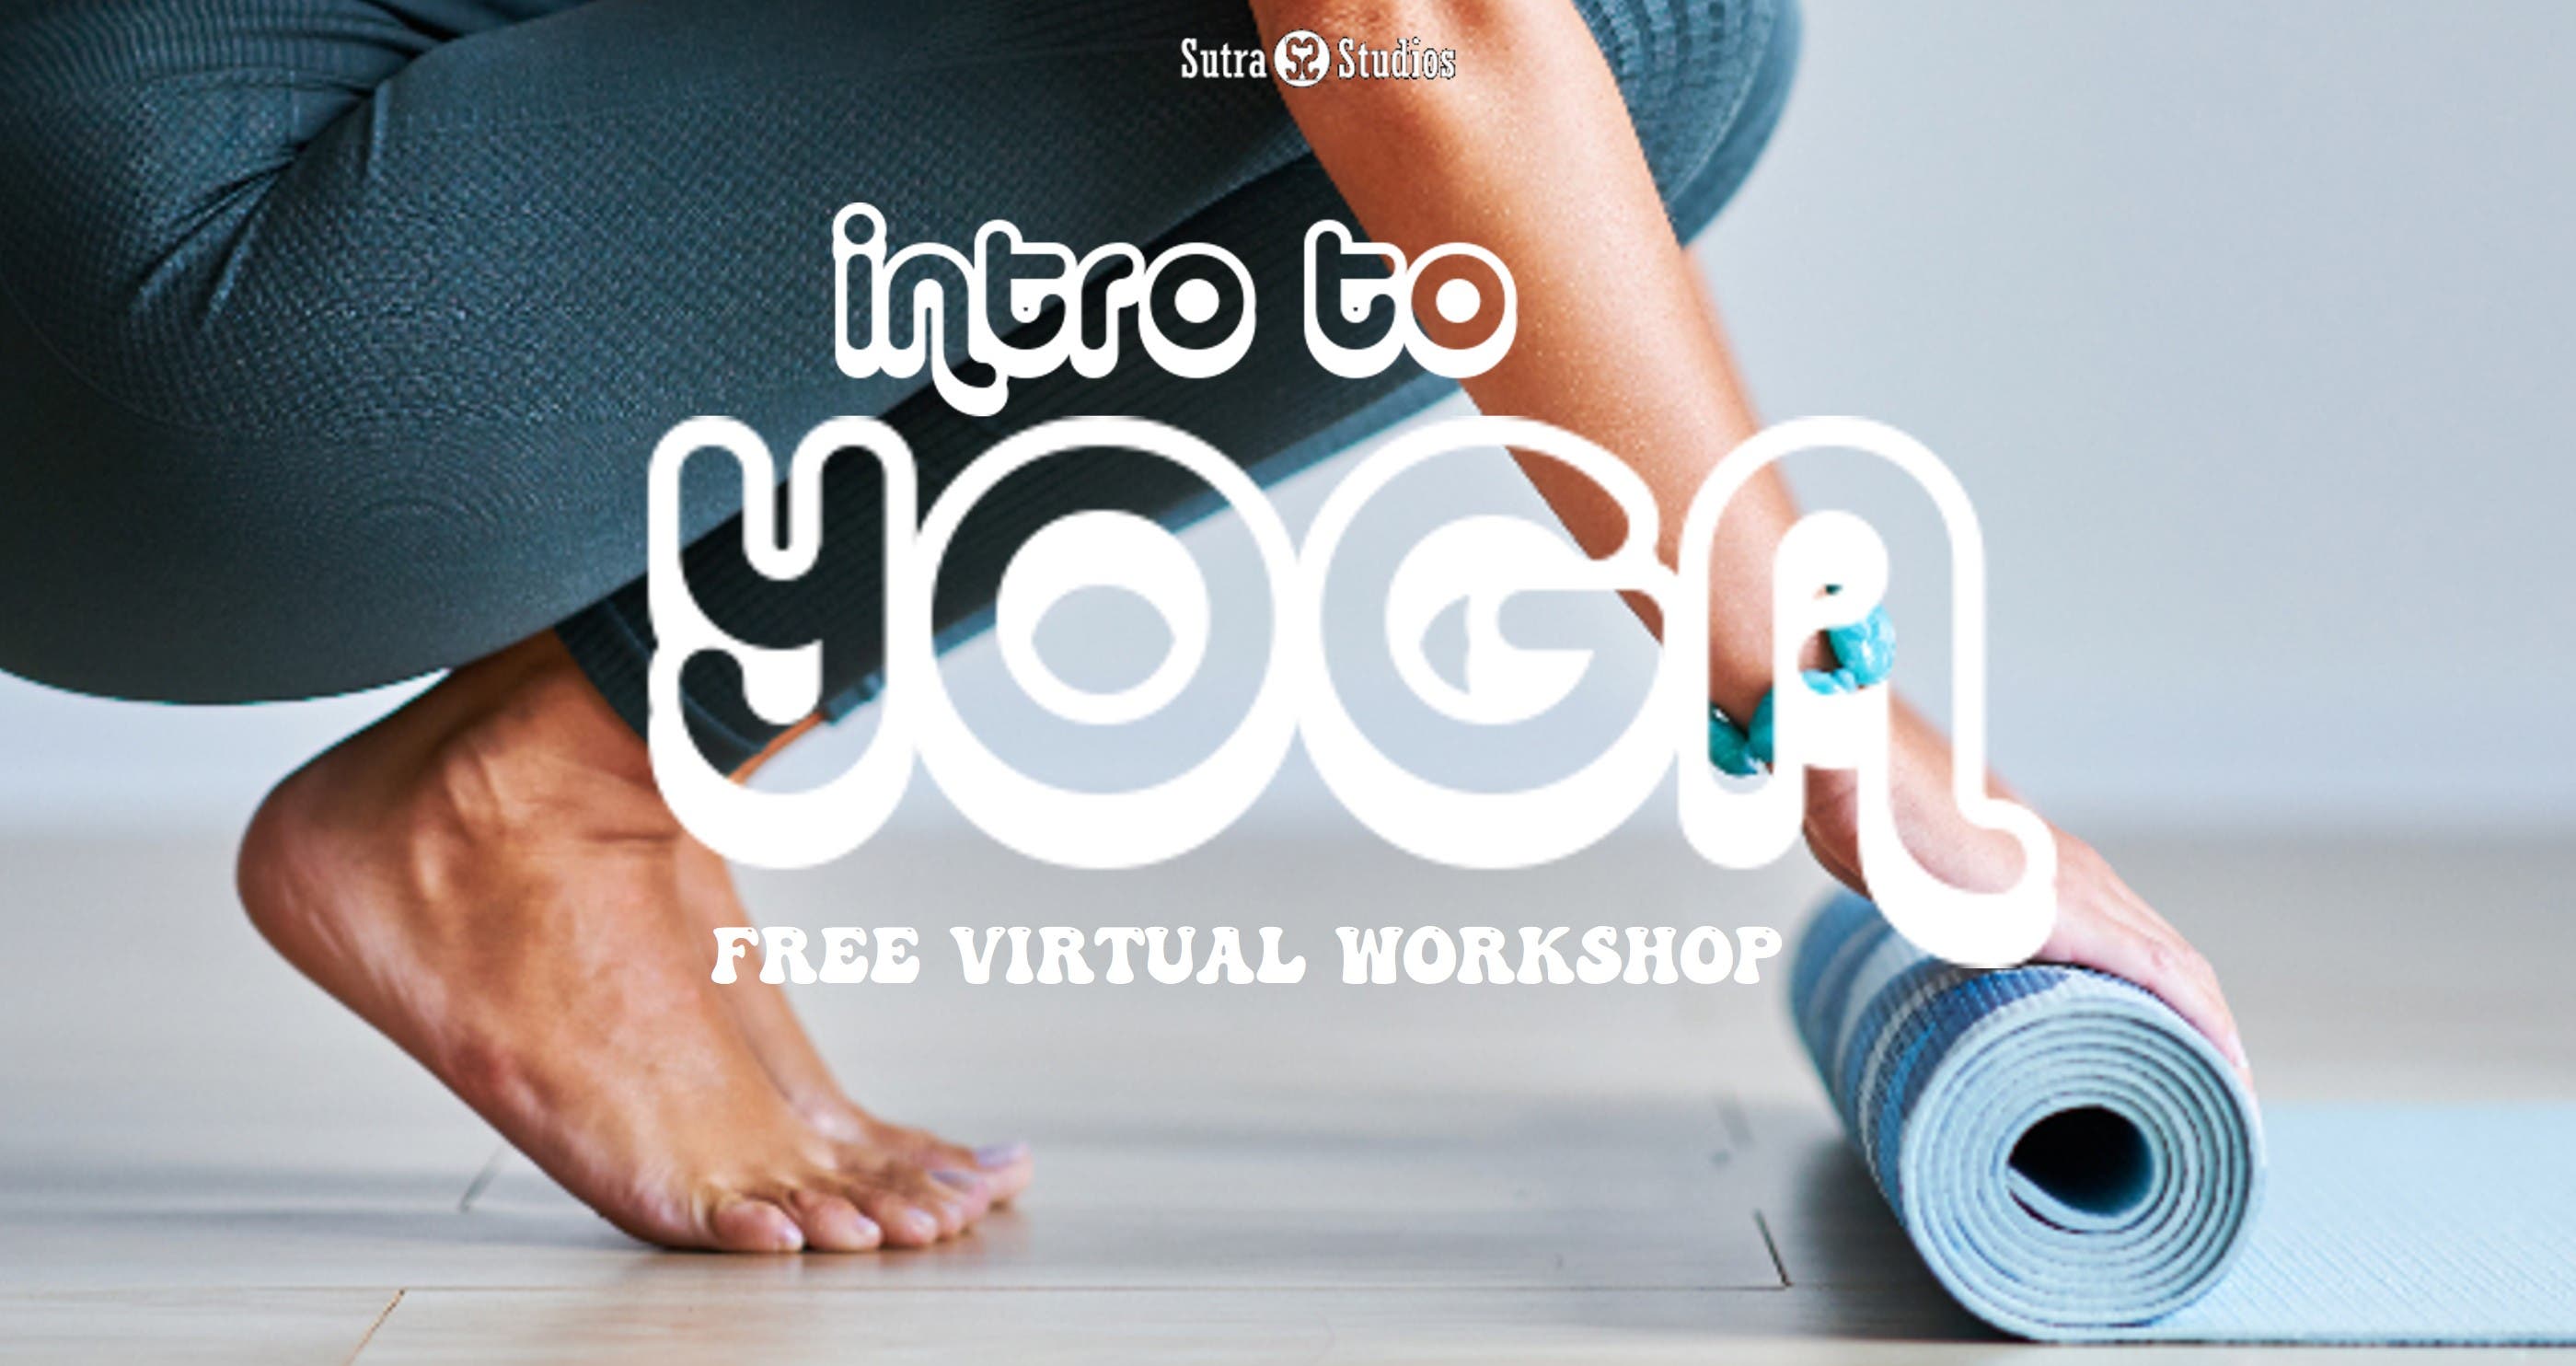 Intro to Yoga | Free Online Beginners Workshop